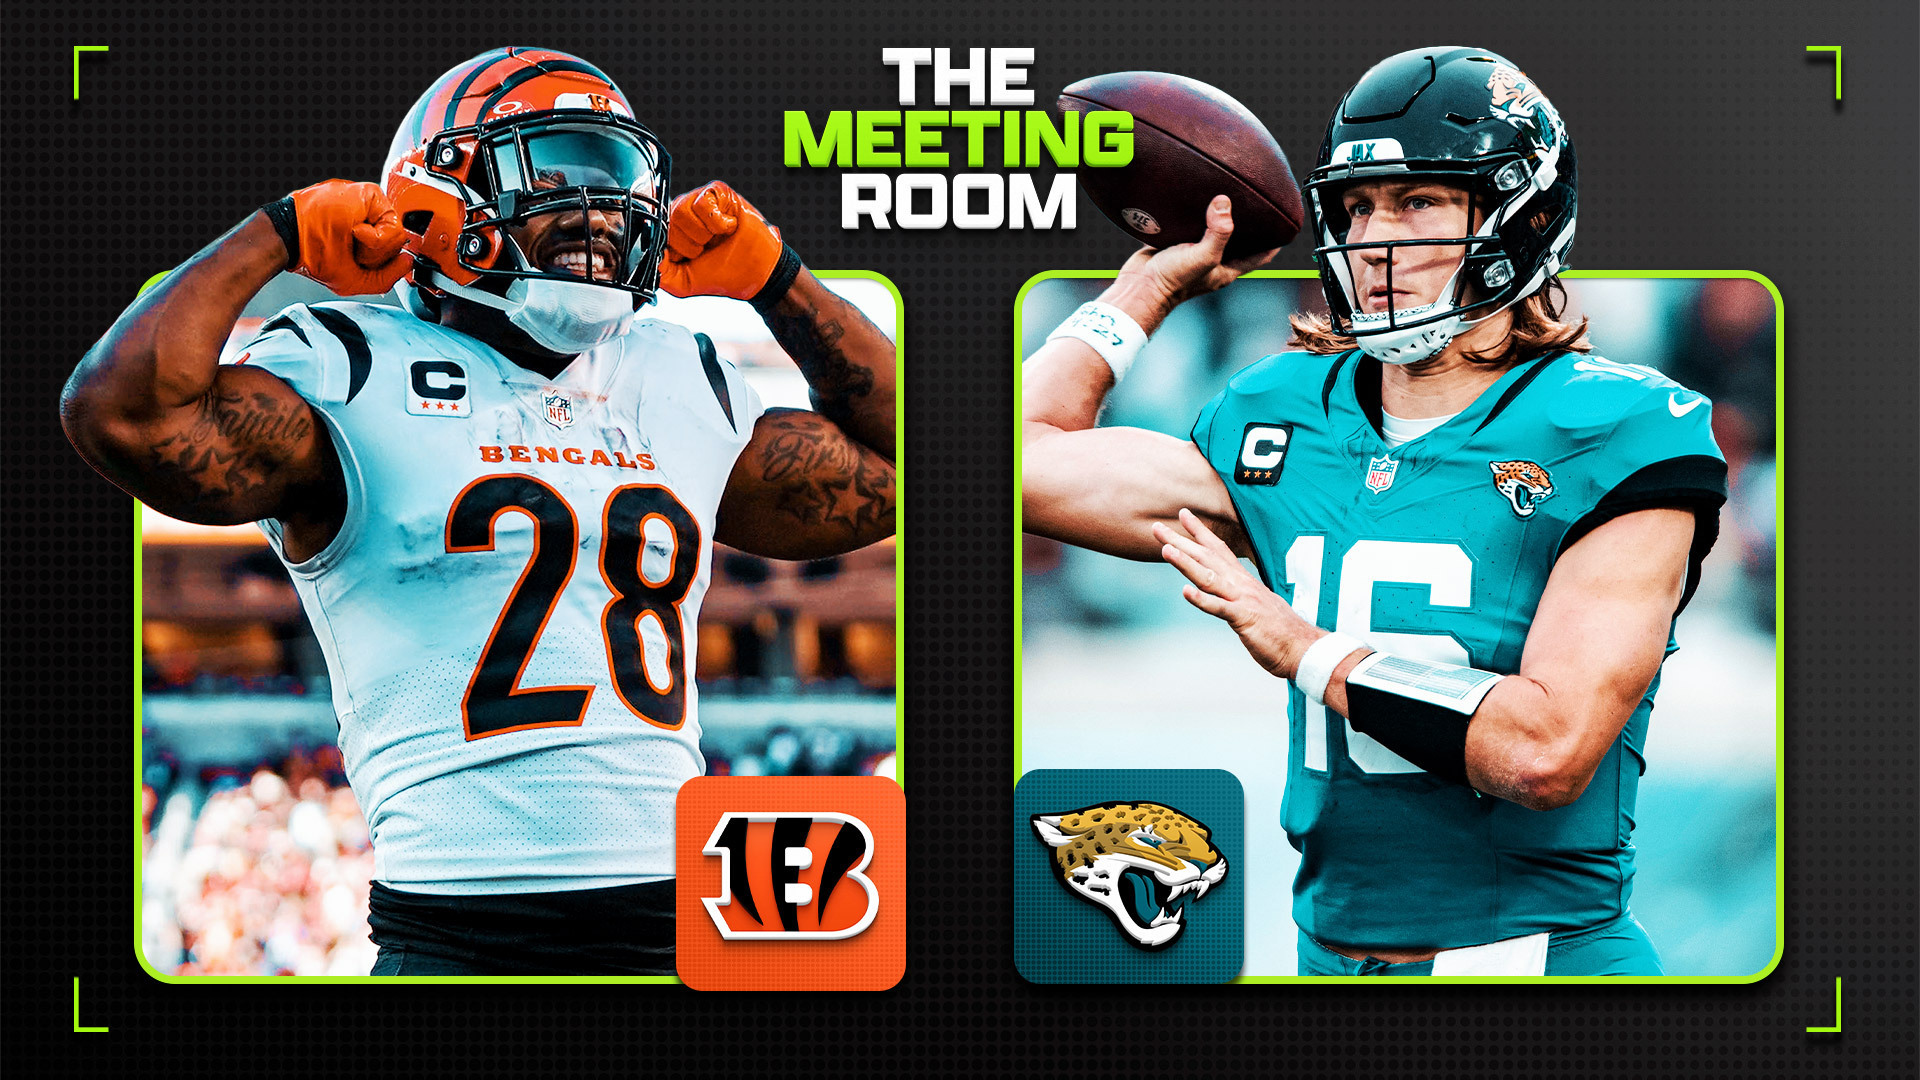 Image of Joe Mixon on the left and Trevor Lawrence on the right with text reading "the Meeting Room" in the middle